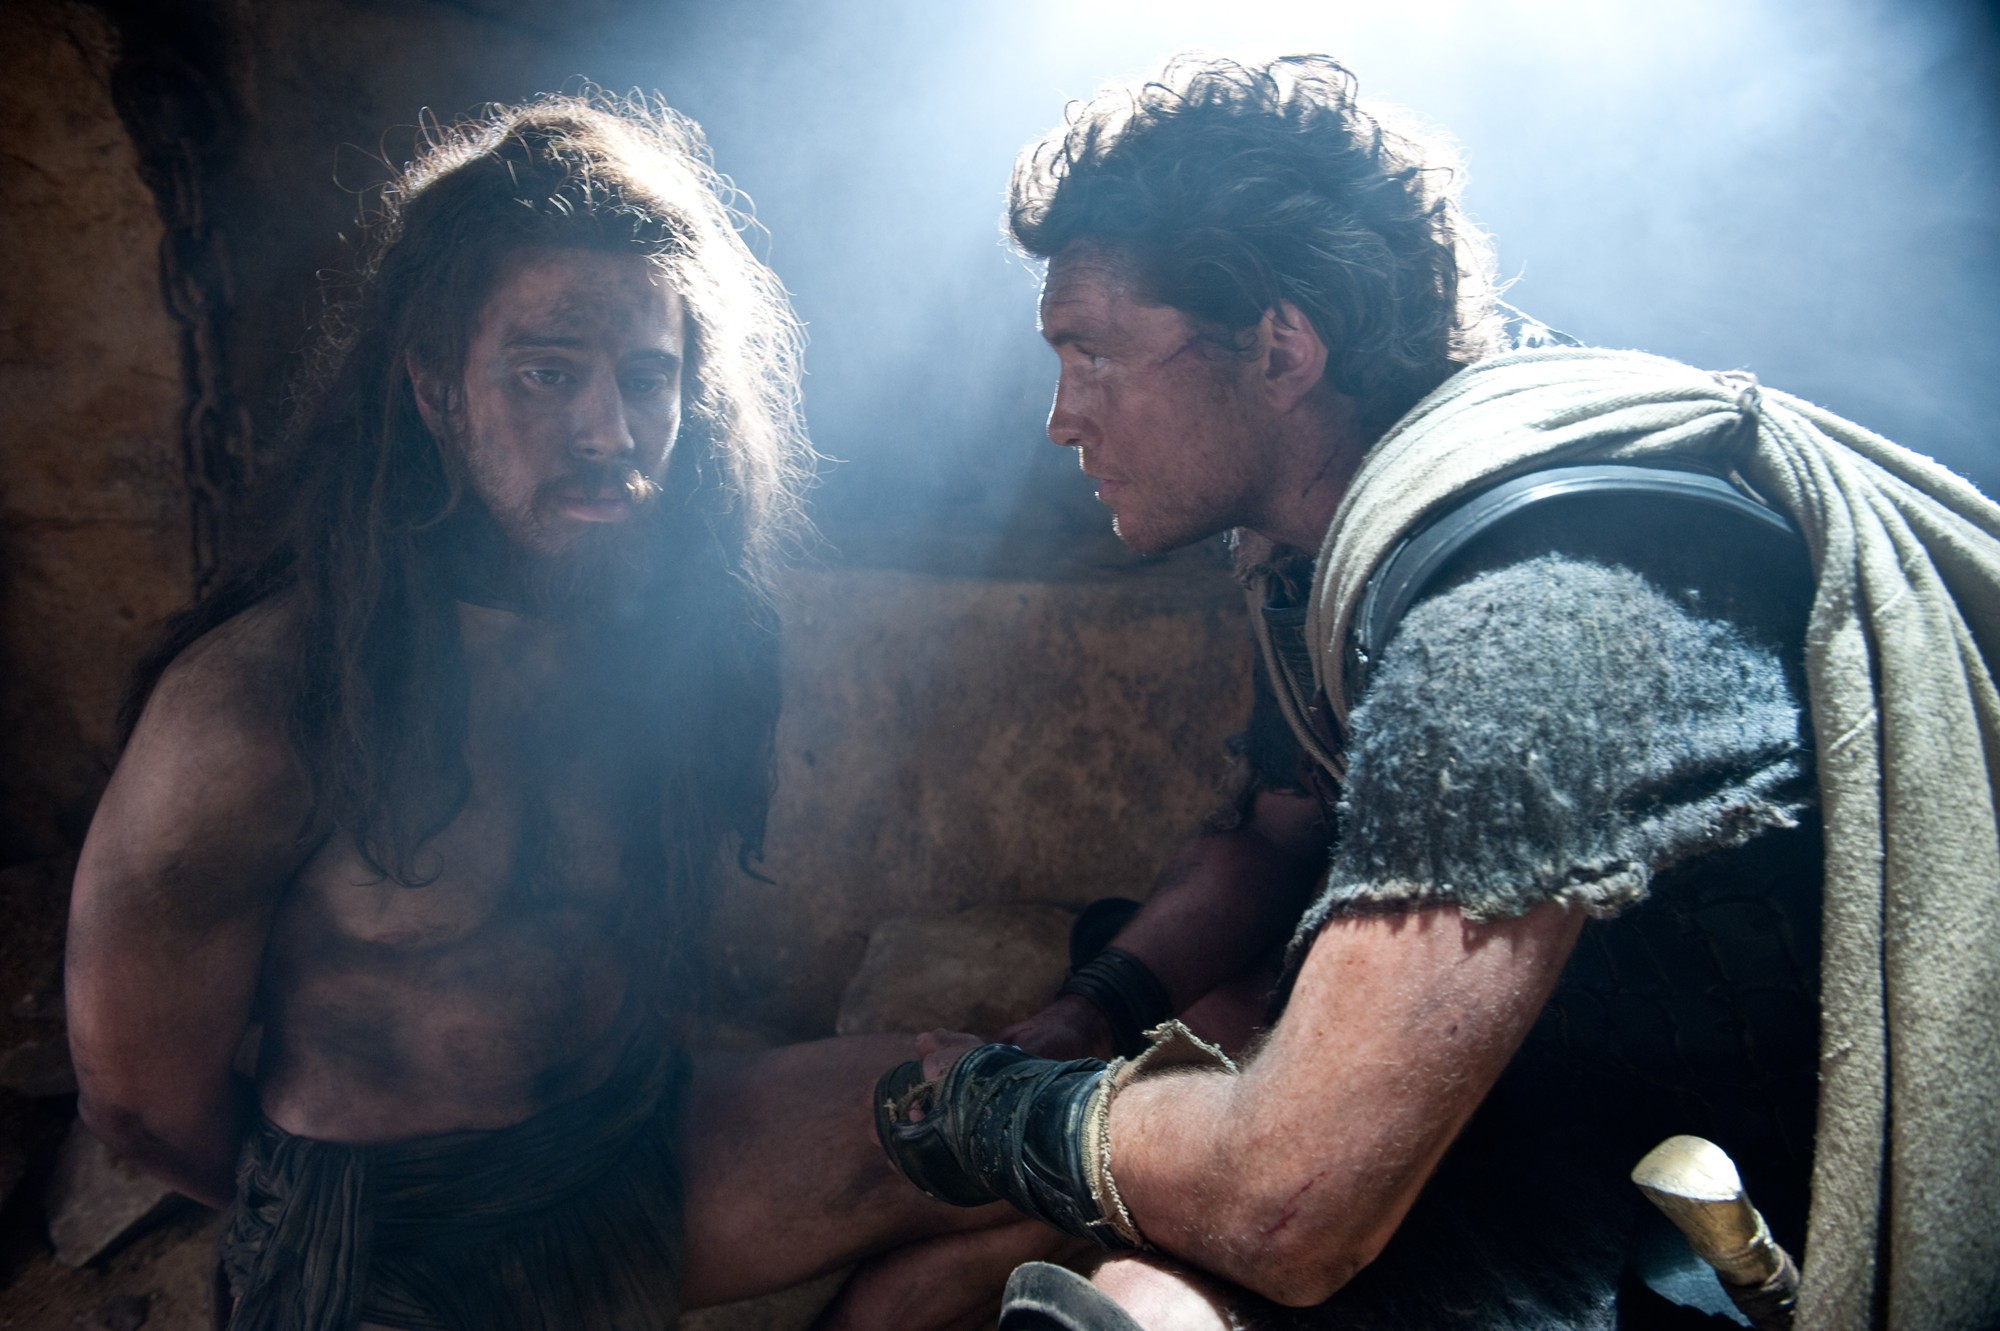 Toby Kebbell stars as Agenor and Sam Worthington stars as Perseus in Warner Bros. Pictures' Wrath of the Titans (2012). Photo credit by Jay Maidment.